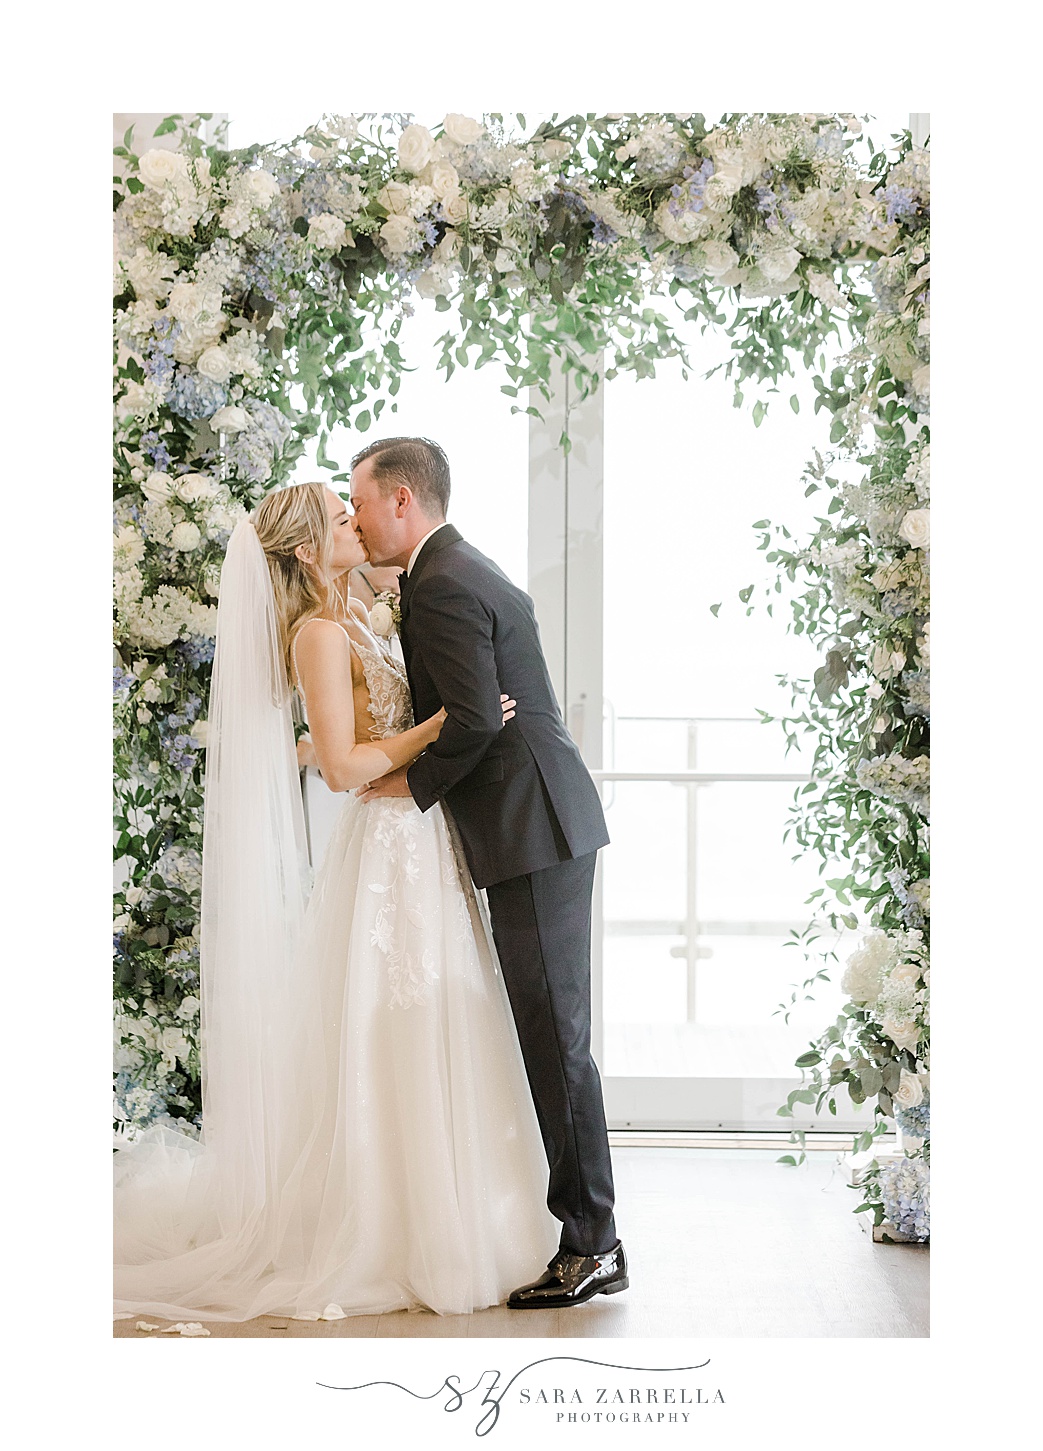 bride and groom kiss under floral arbor during ceremony at Newport Harbor Island Resort